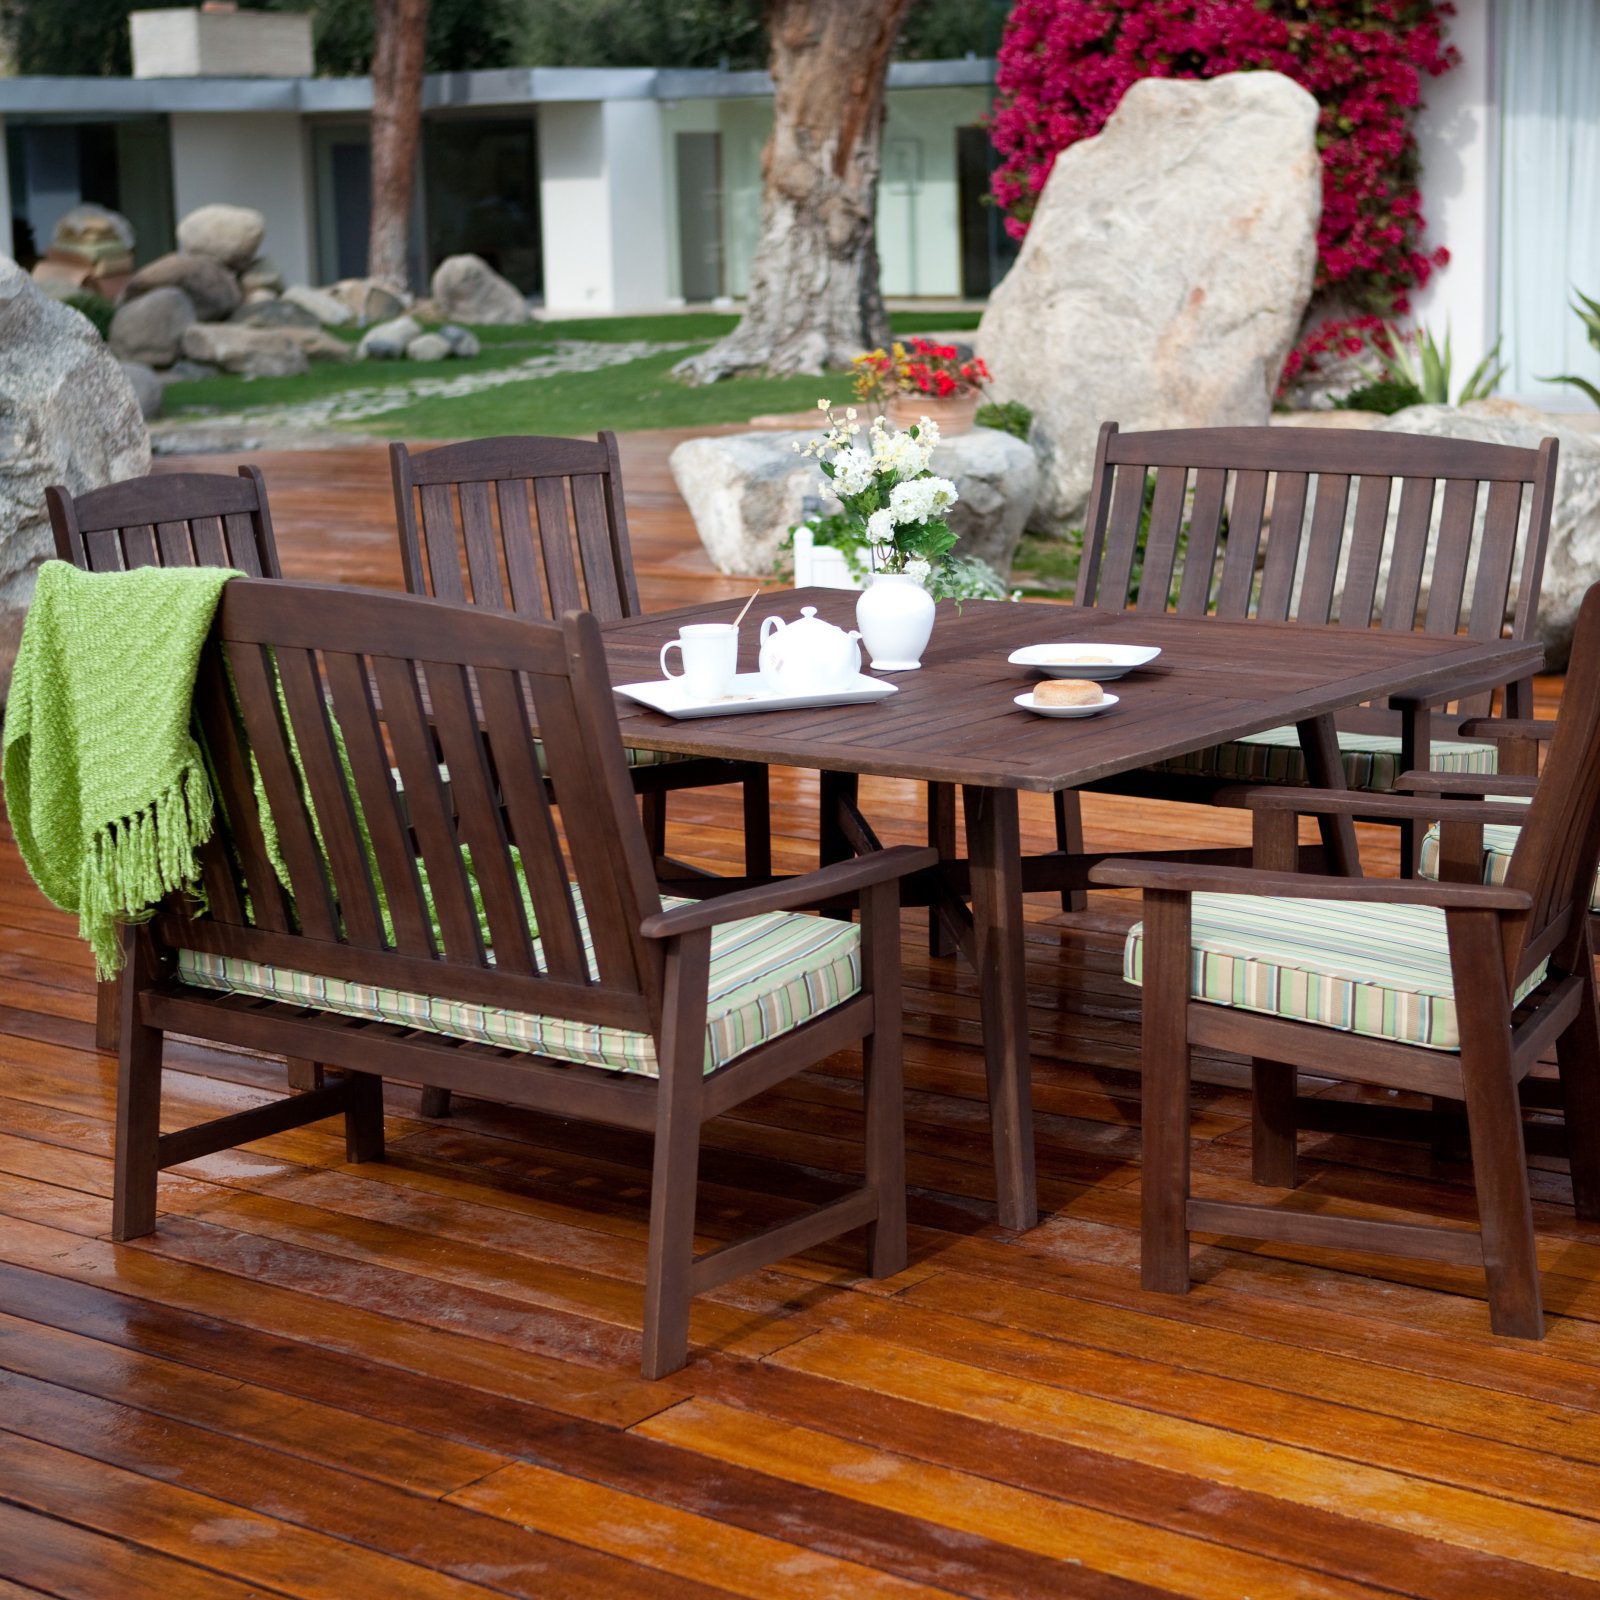 Outdoor dining table decorating | Hawk Haven